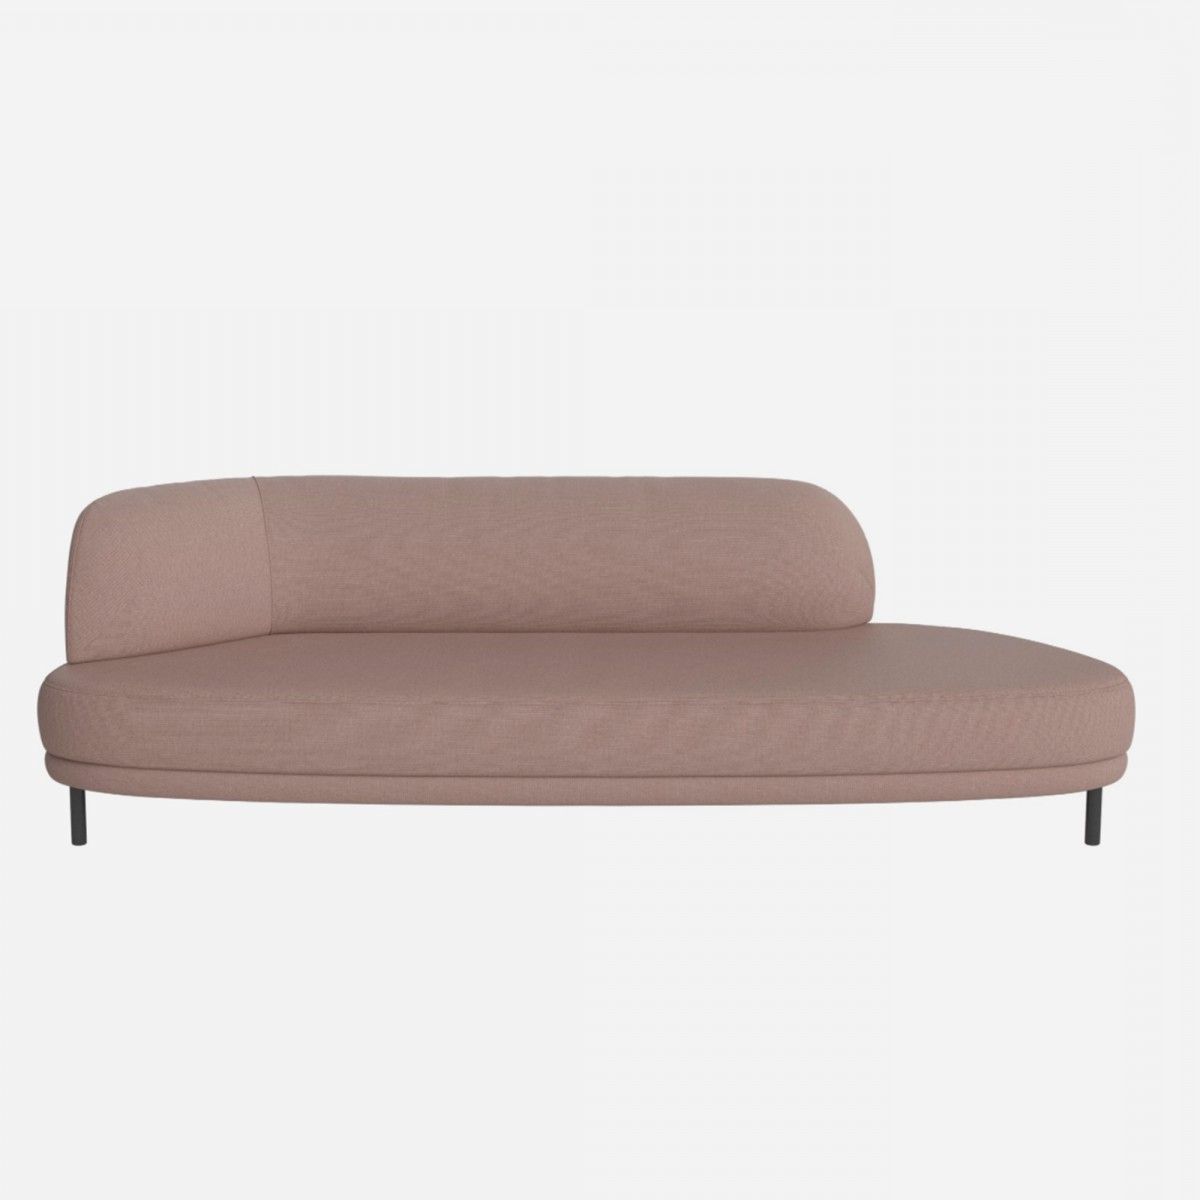 Grace Sofa Chairs Pertaining To Favorite Modular Grace 3 Seaters Sofa With London Fabric – Bolia (View 16 of 20)